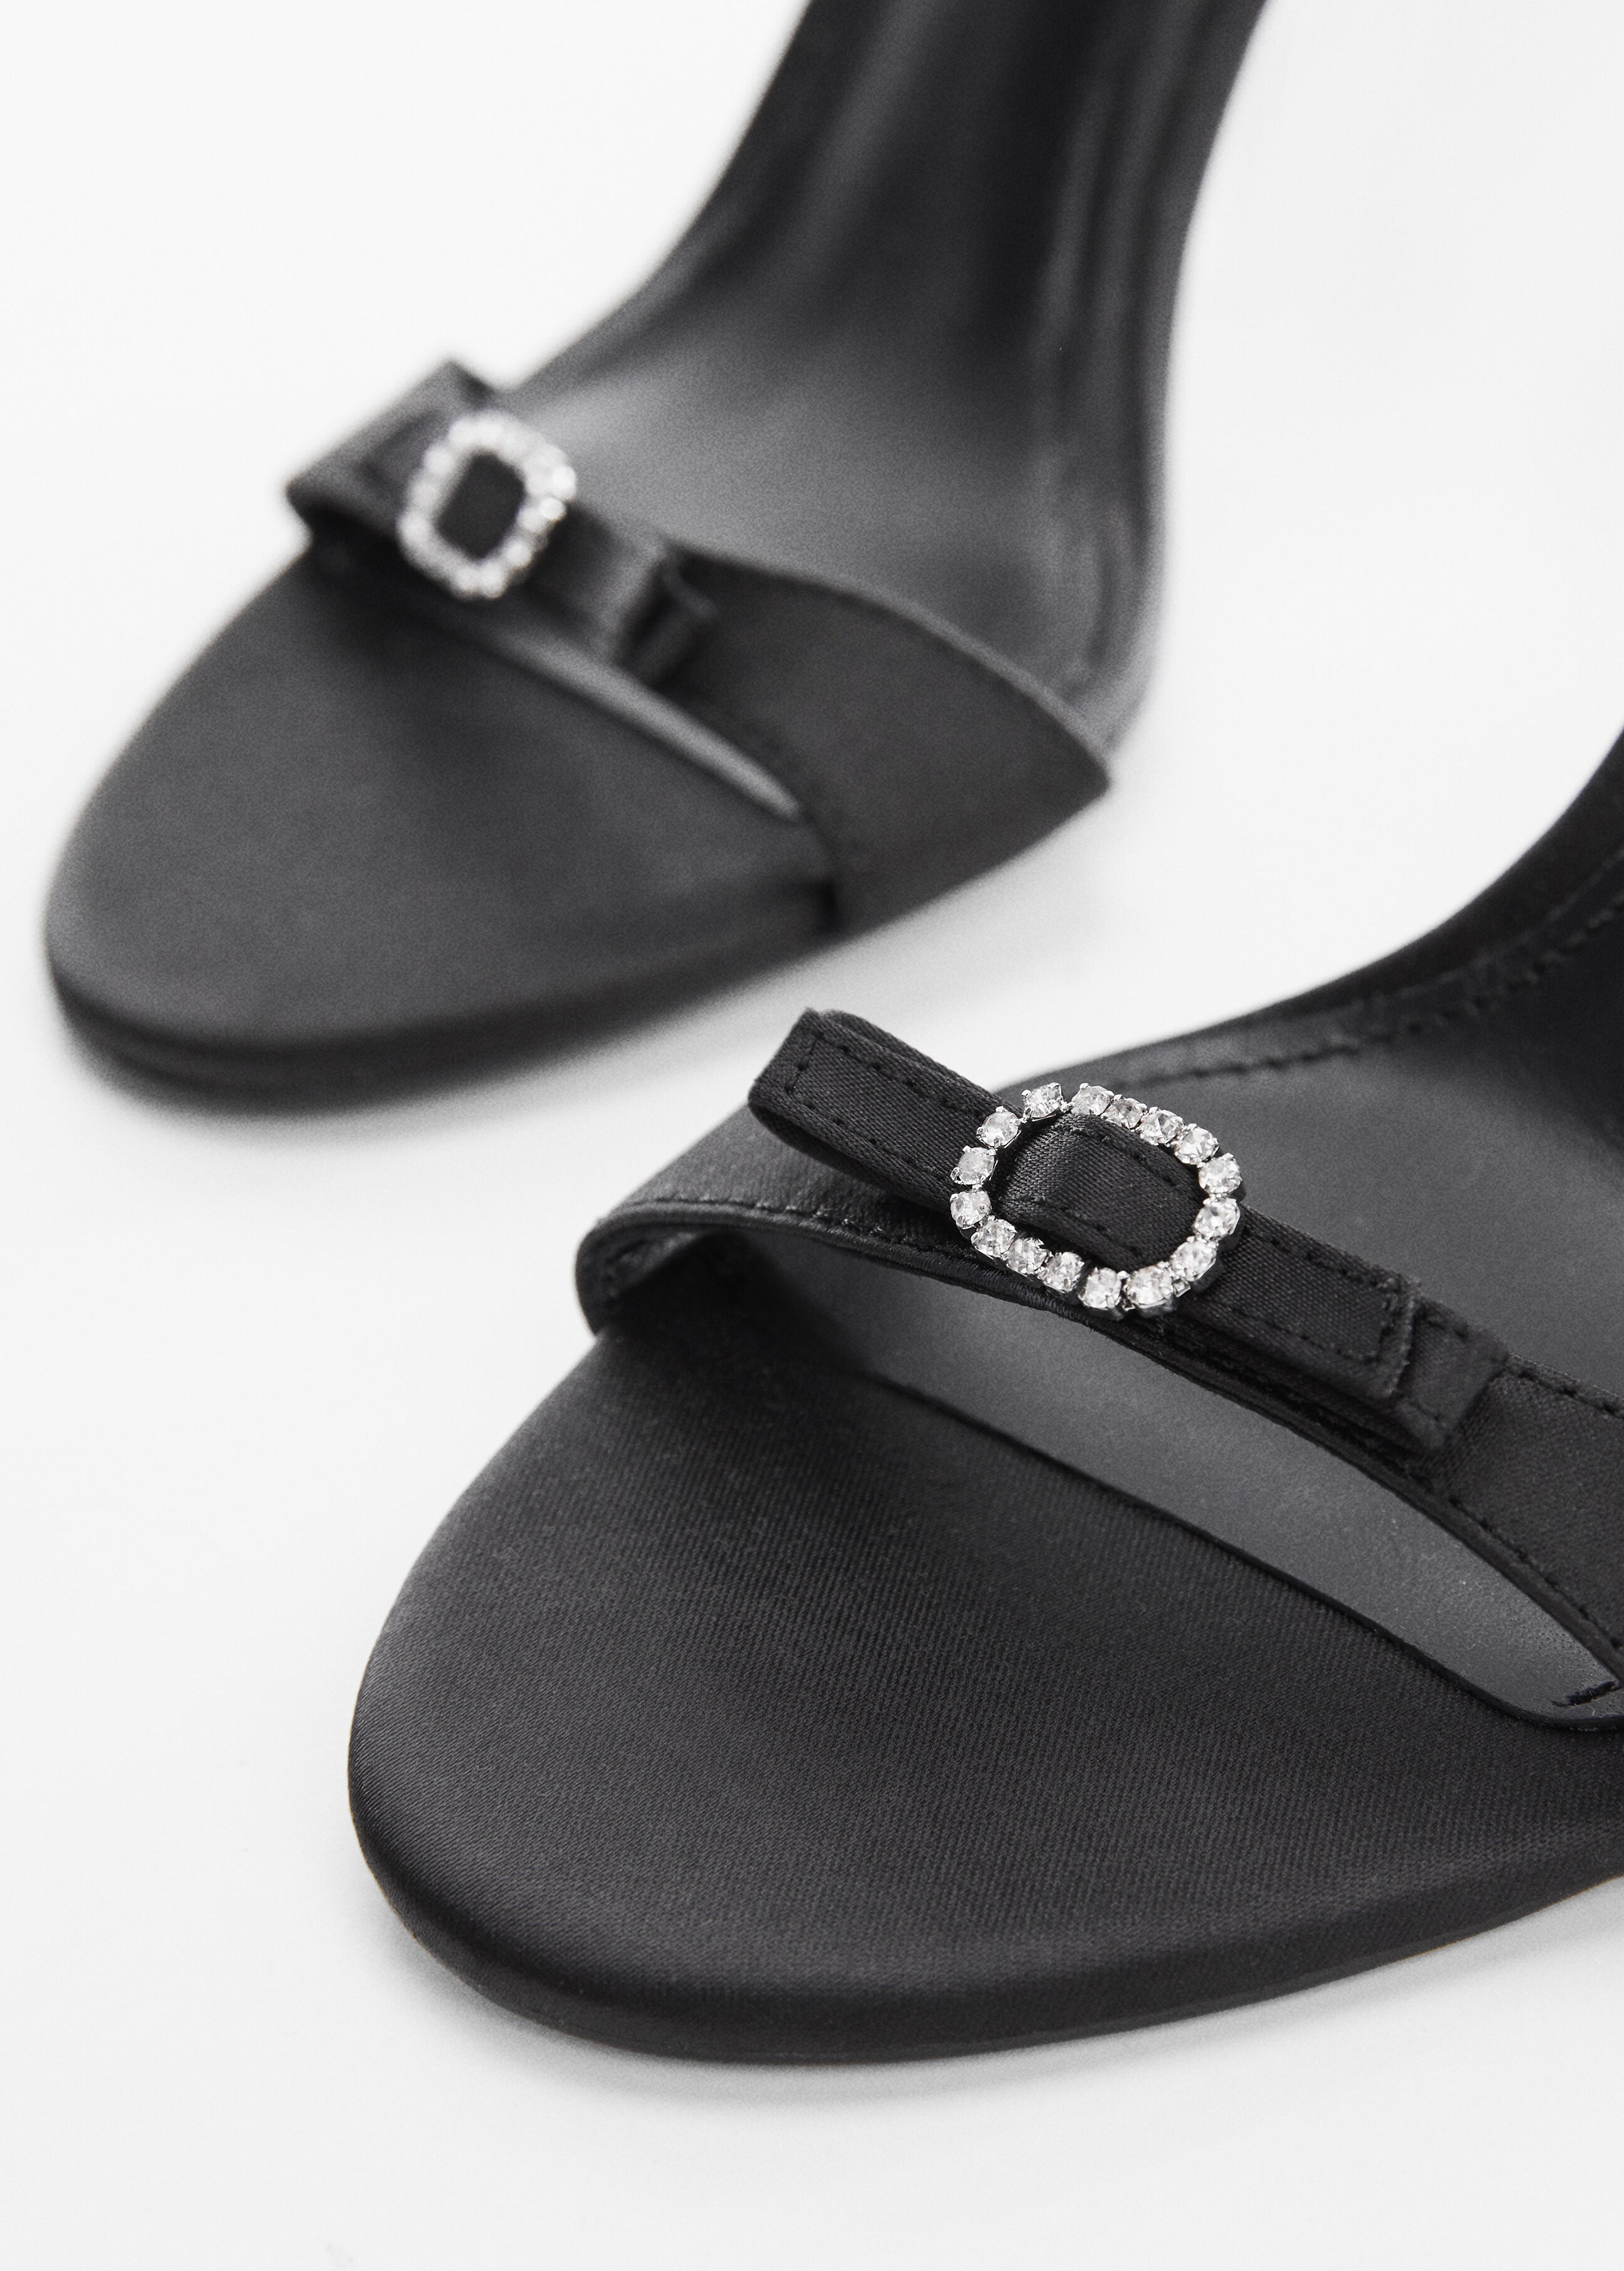 Satin sandal with rhinestone buckle - Details of the article 2